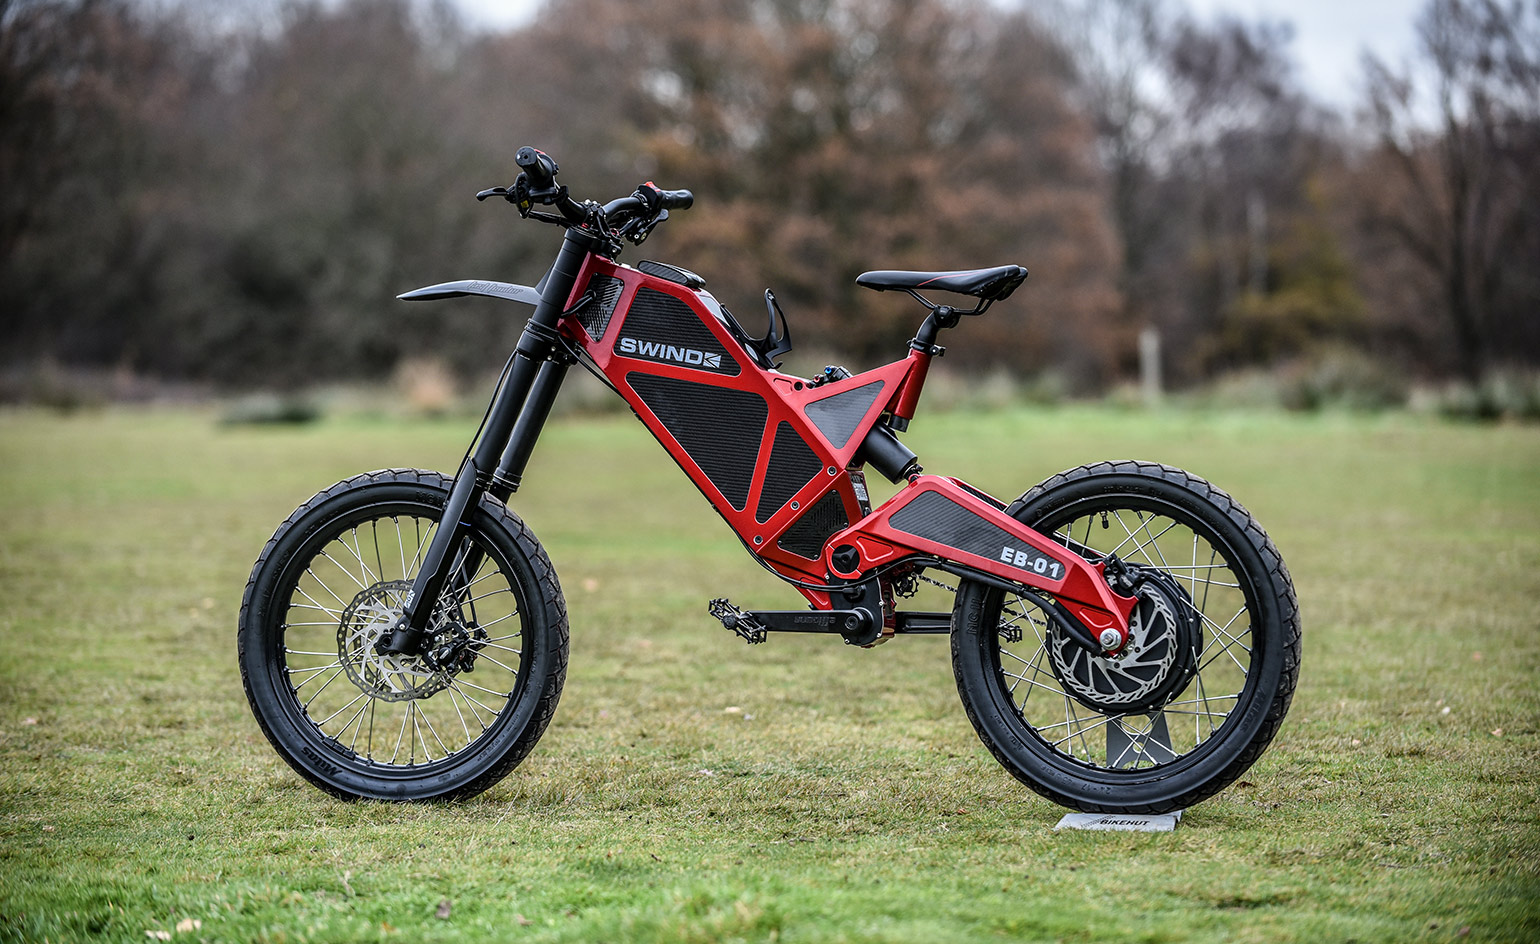 Reviewing SWIND EB-01: the e-bike fastest 2018 | Wallpaper in the world